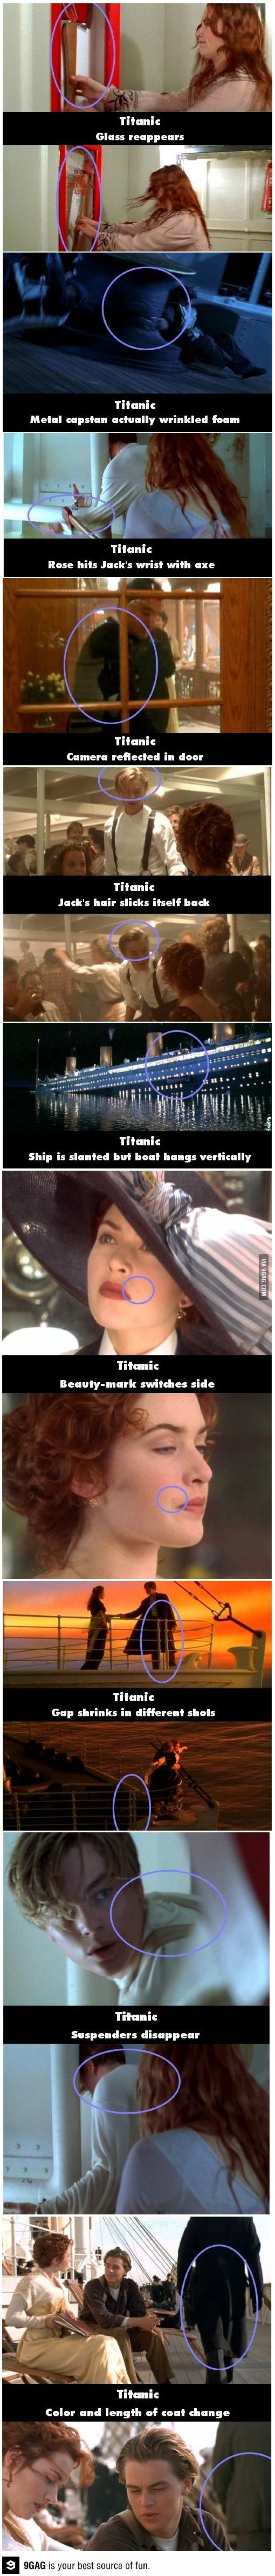 13 Titanic Movie Mistakes You Probably Missed 